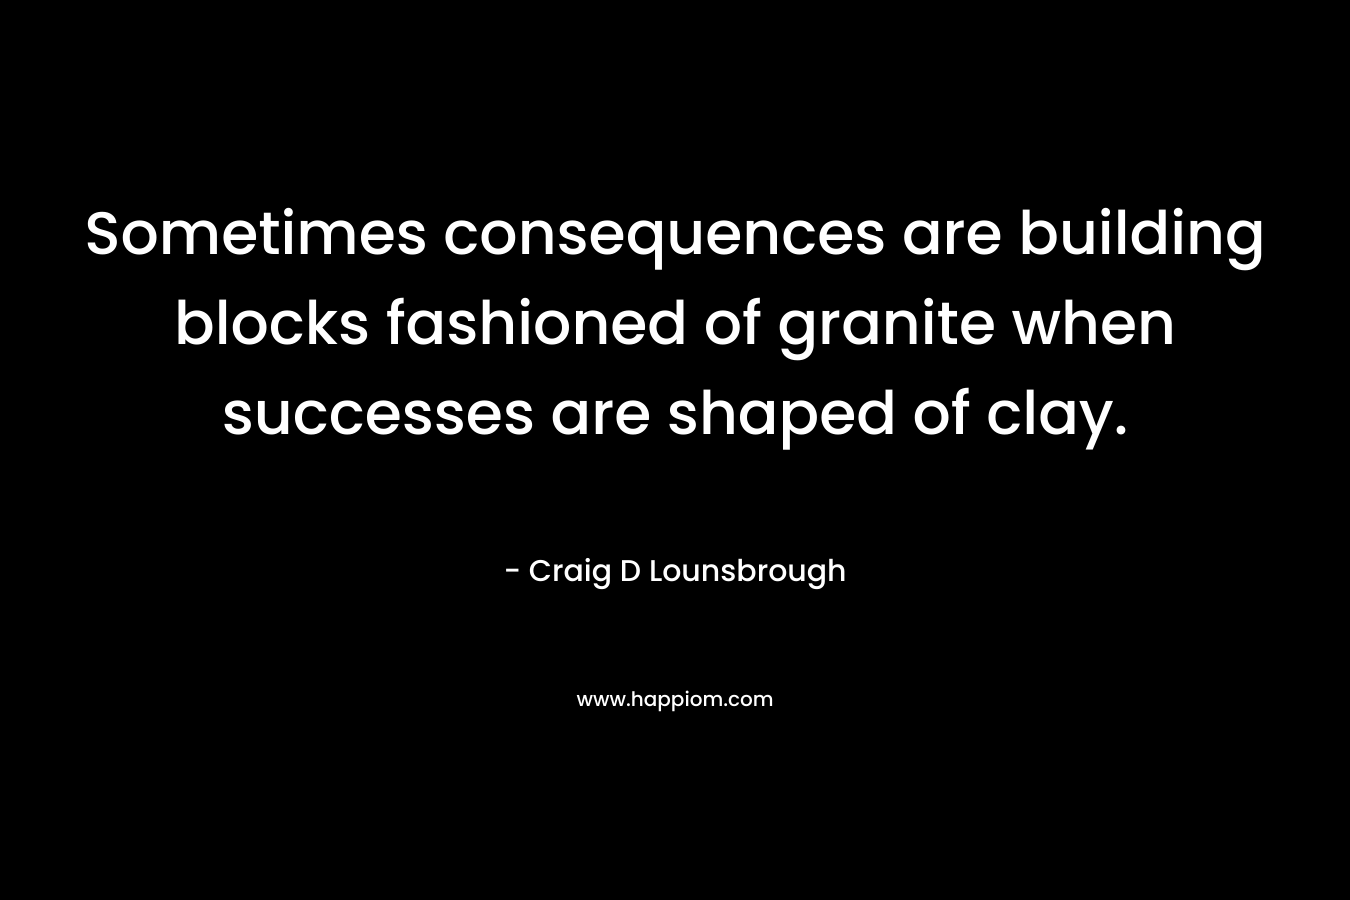 Sometimes consequences are building blocks fashioned of granite when successes are shaped of clay.